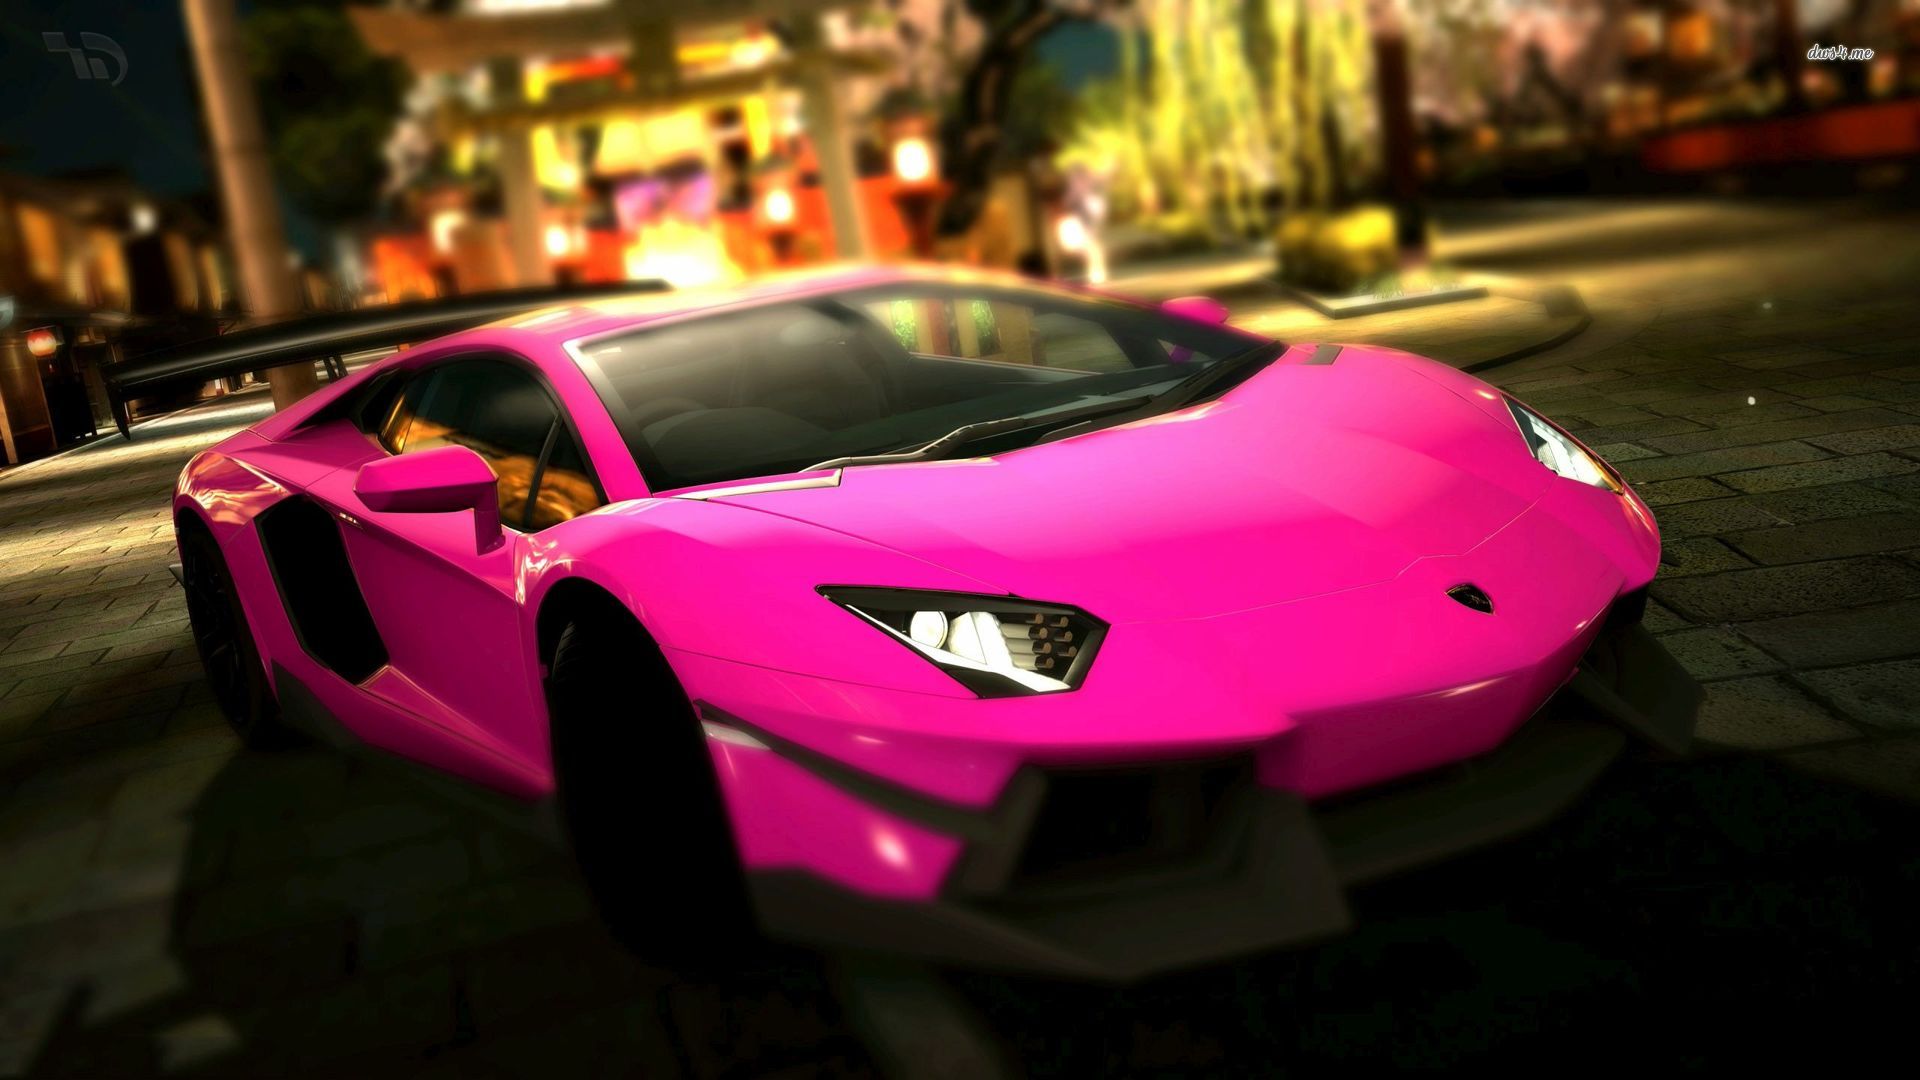 Best Pink Car Wallpaper Full HD Pictures